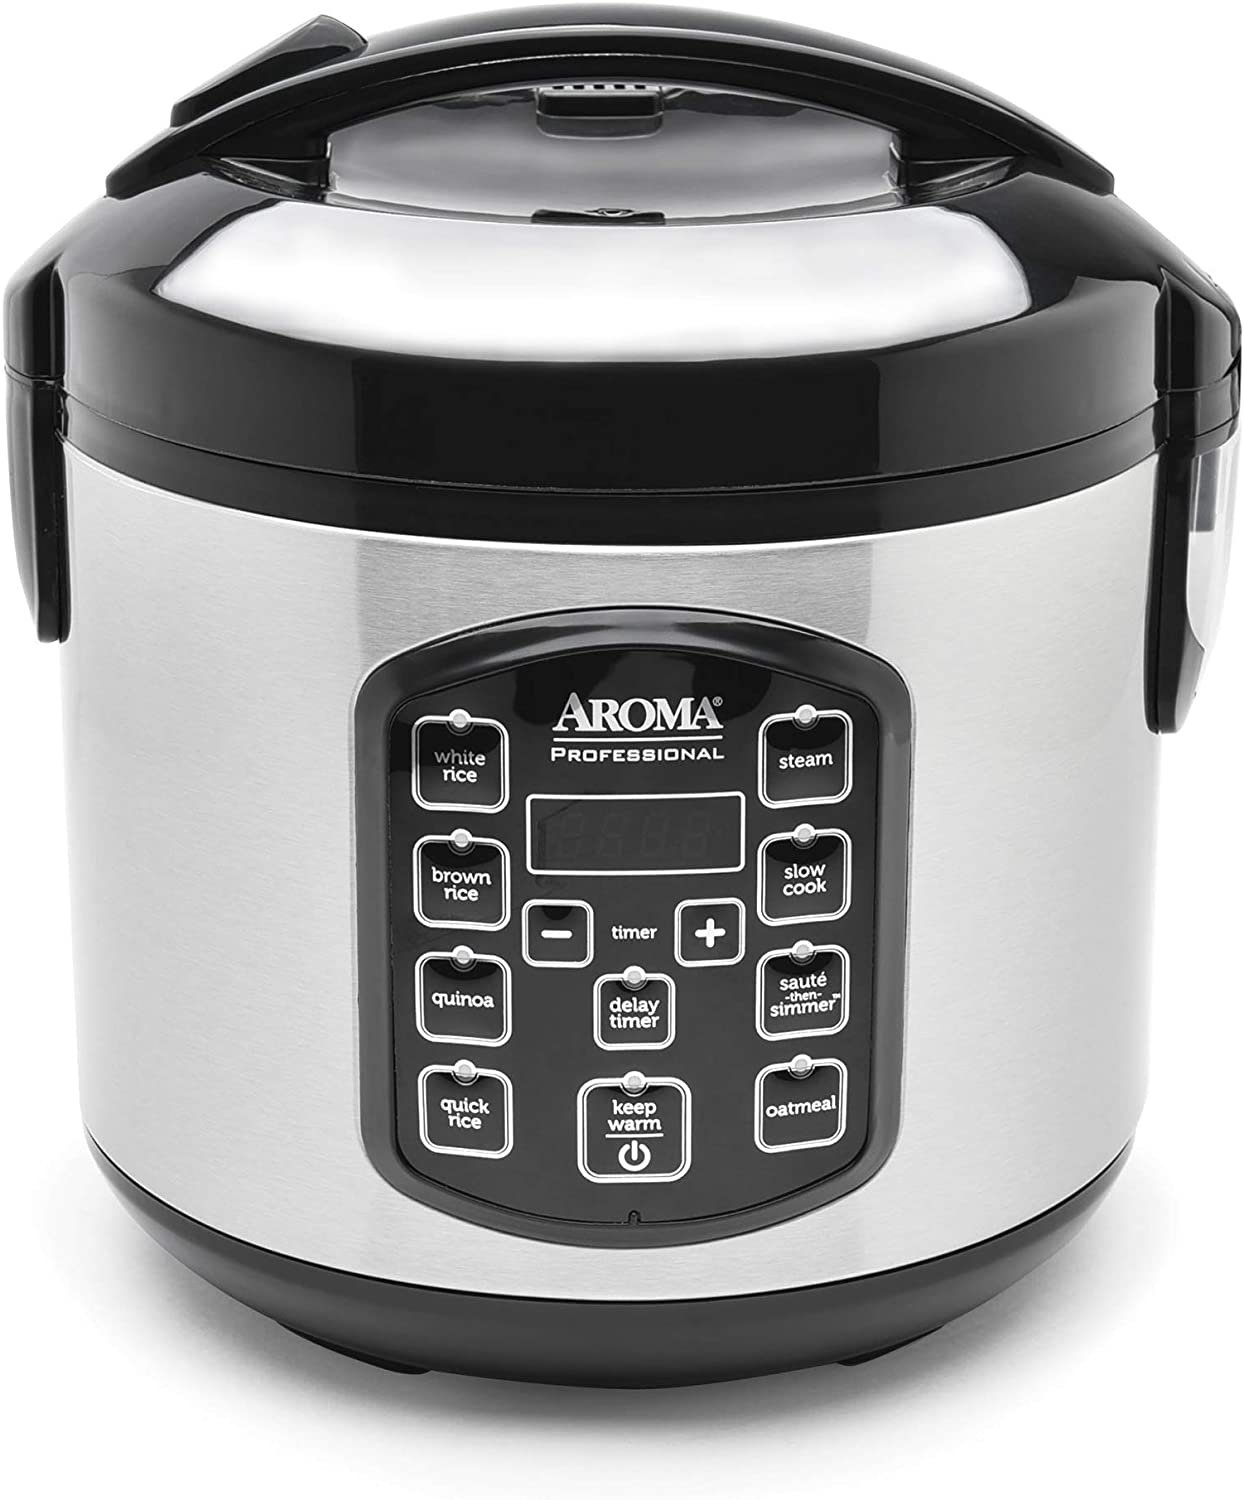 Best Buy: Hamilton Beach 8-Cup Rice Cooker/Steamer Stainless Steel 37519